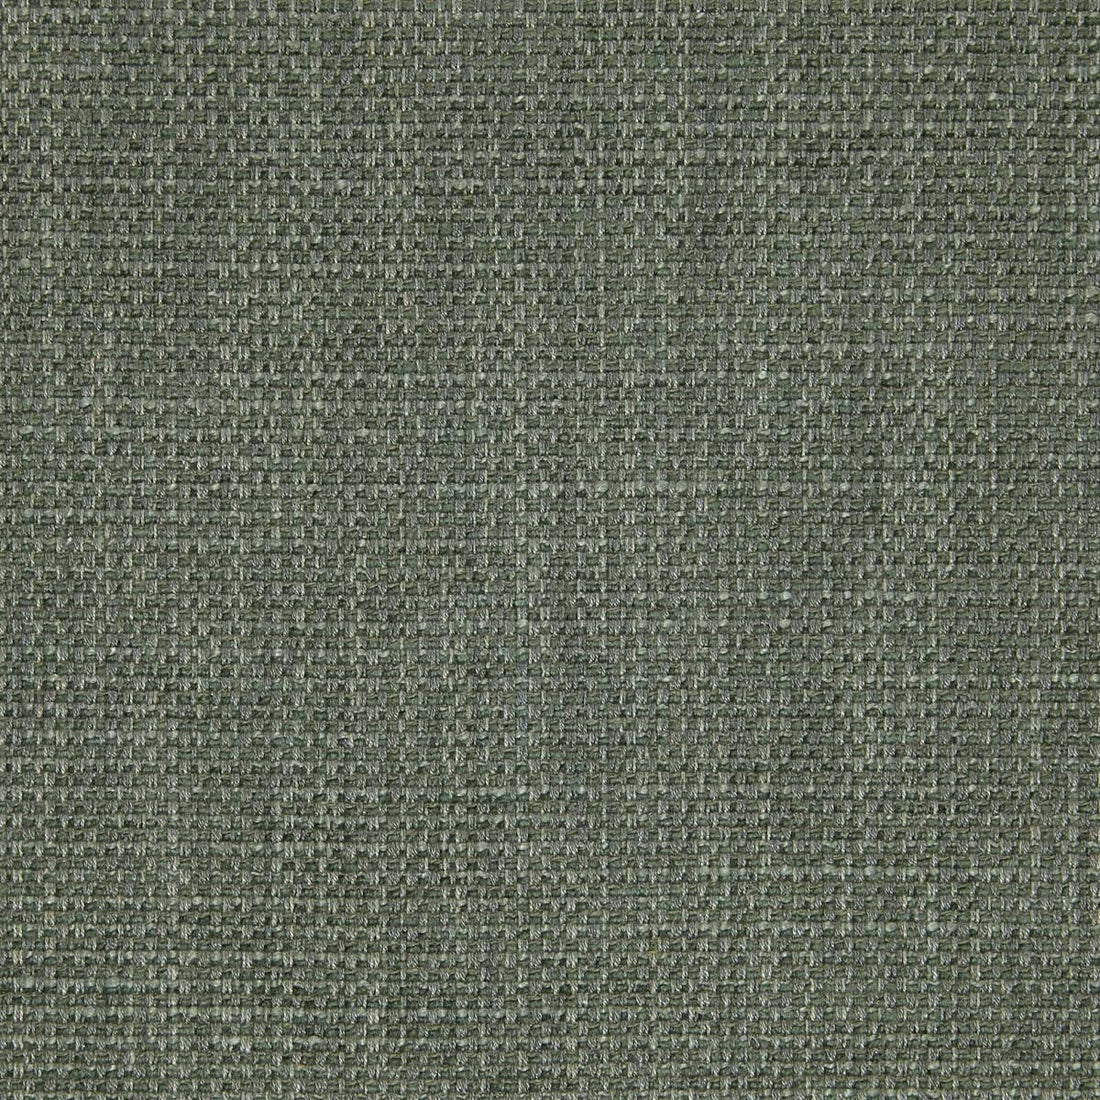 Godai fabric in 13 color - pattern LZ-30349.13.0 - by Kravet Design in the Lizzo collection